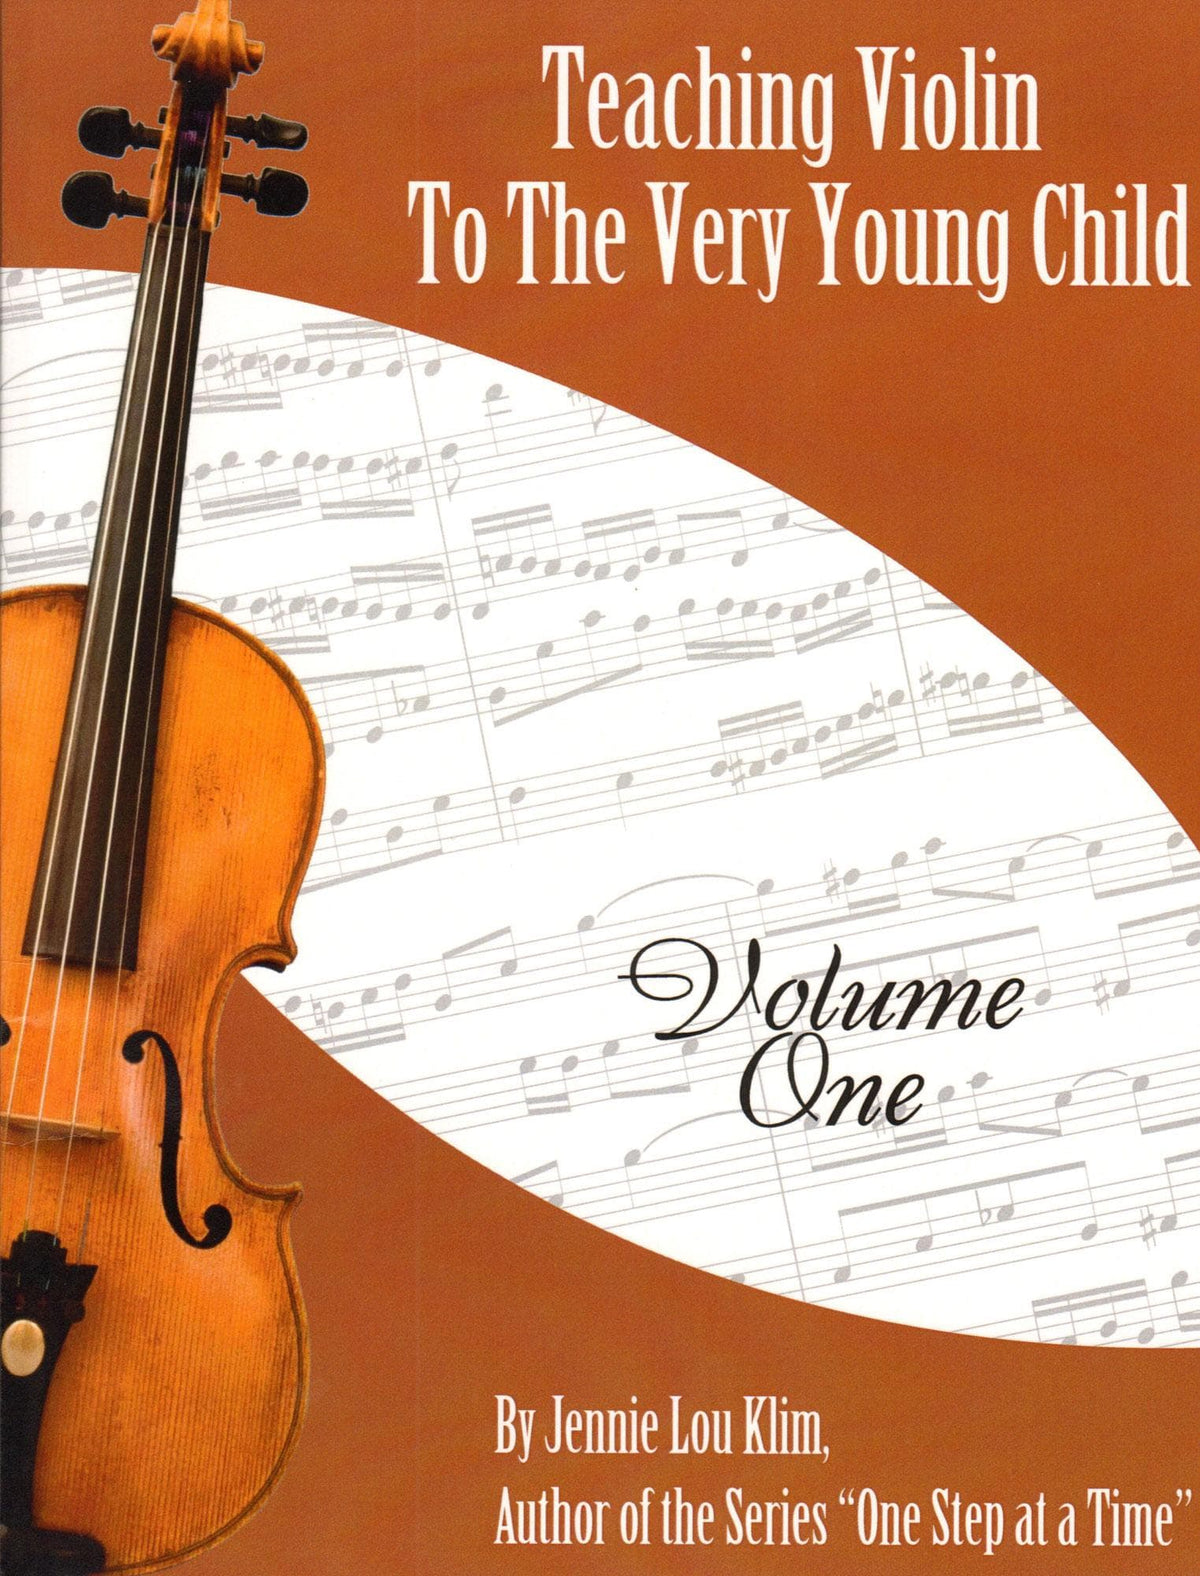 Jennie Lou Klim - Teaching Violin to the Very Young Child - Beachside Publications